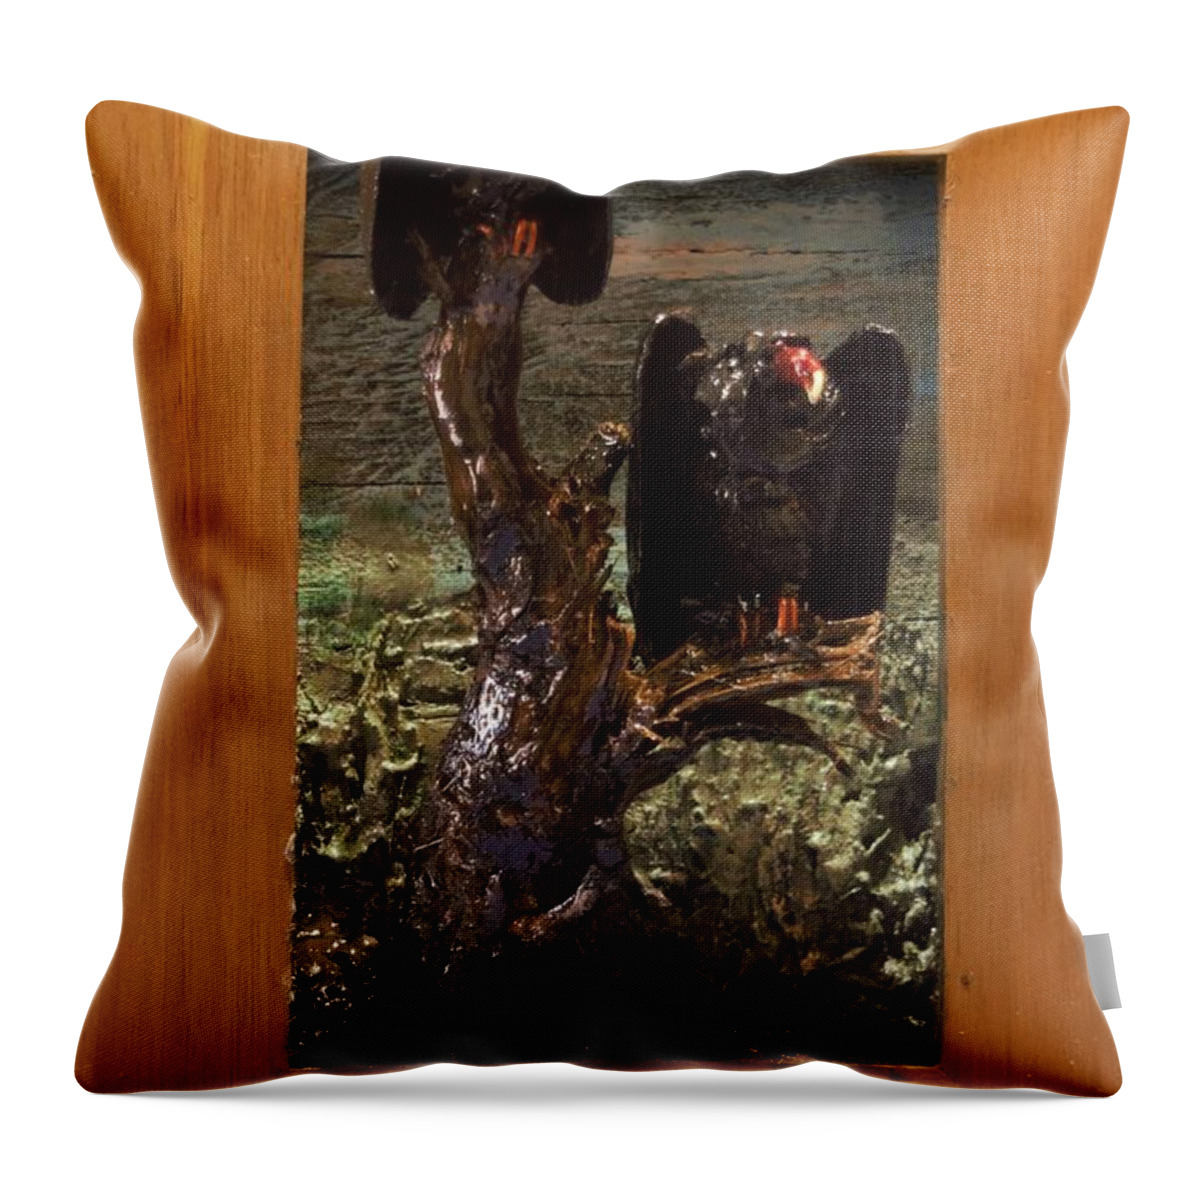 Perched Vultures Throw Pillow featuring the mixed media Vultures Projecting from Frame by Roger Swezey